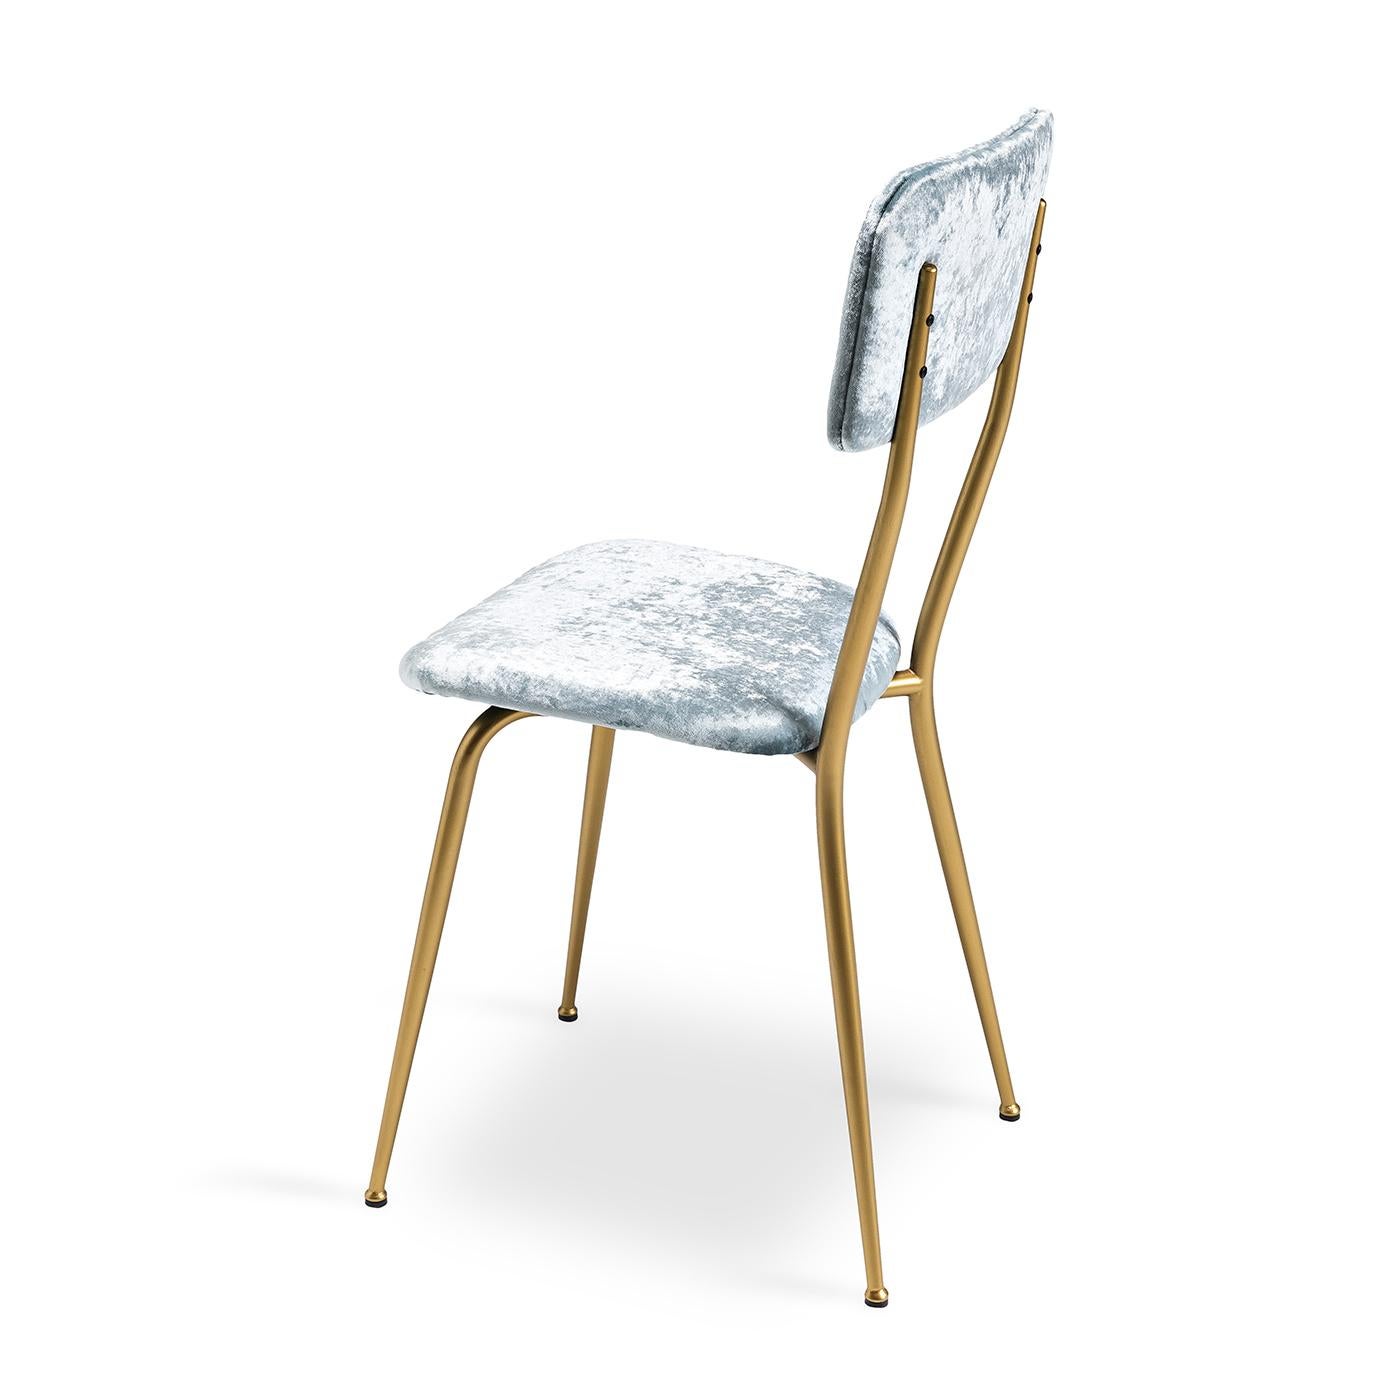 Add a sophisticated touch to your modern living space with the Miss Ava 9 Chair. Defined by a sleek, understated Silhouette, its metal frame boasts a brushed brass finish. Light blue velvet upholstery creates a calming Ambience, whilst blending